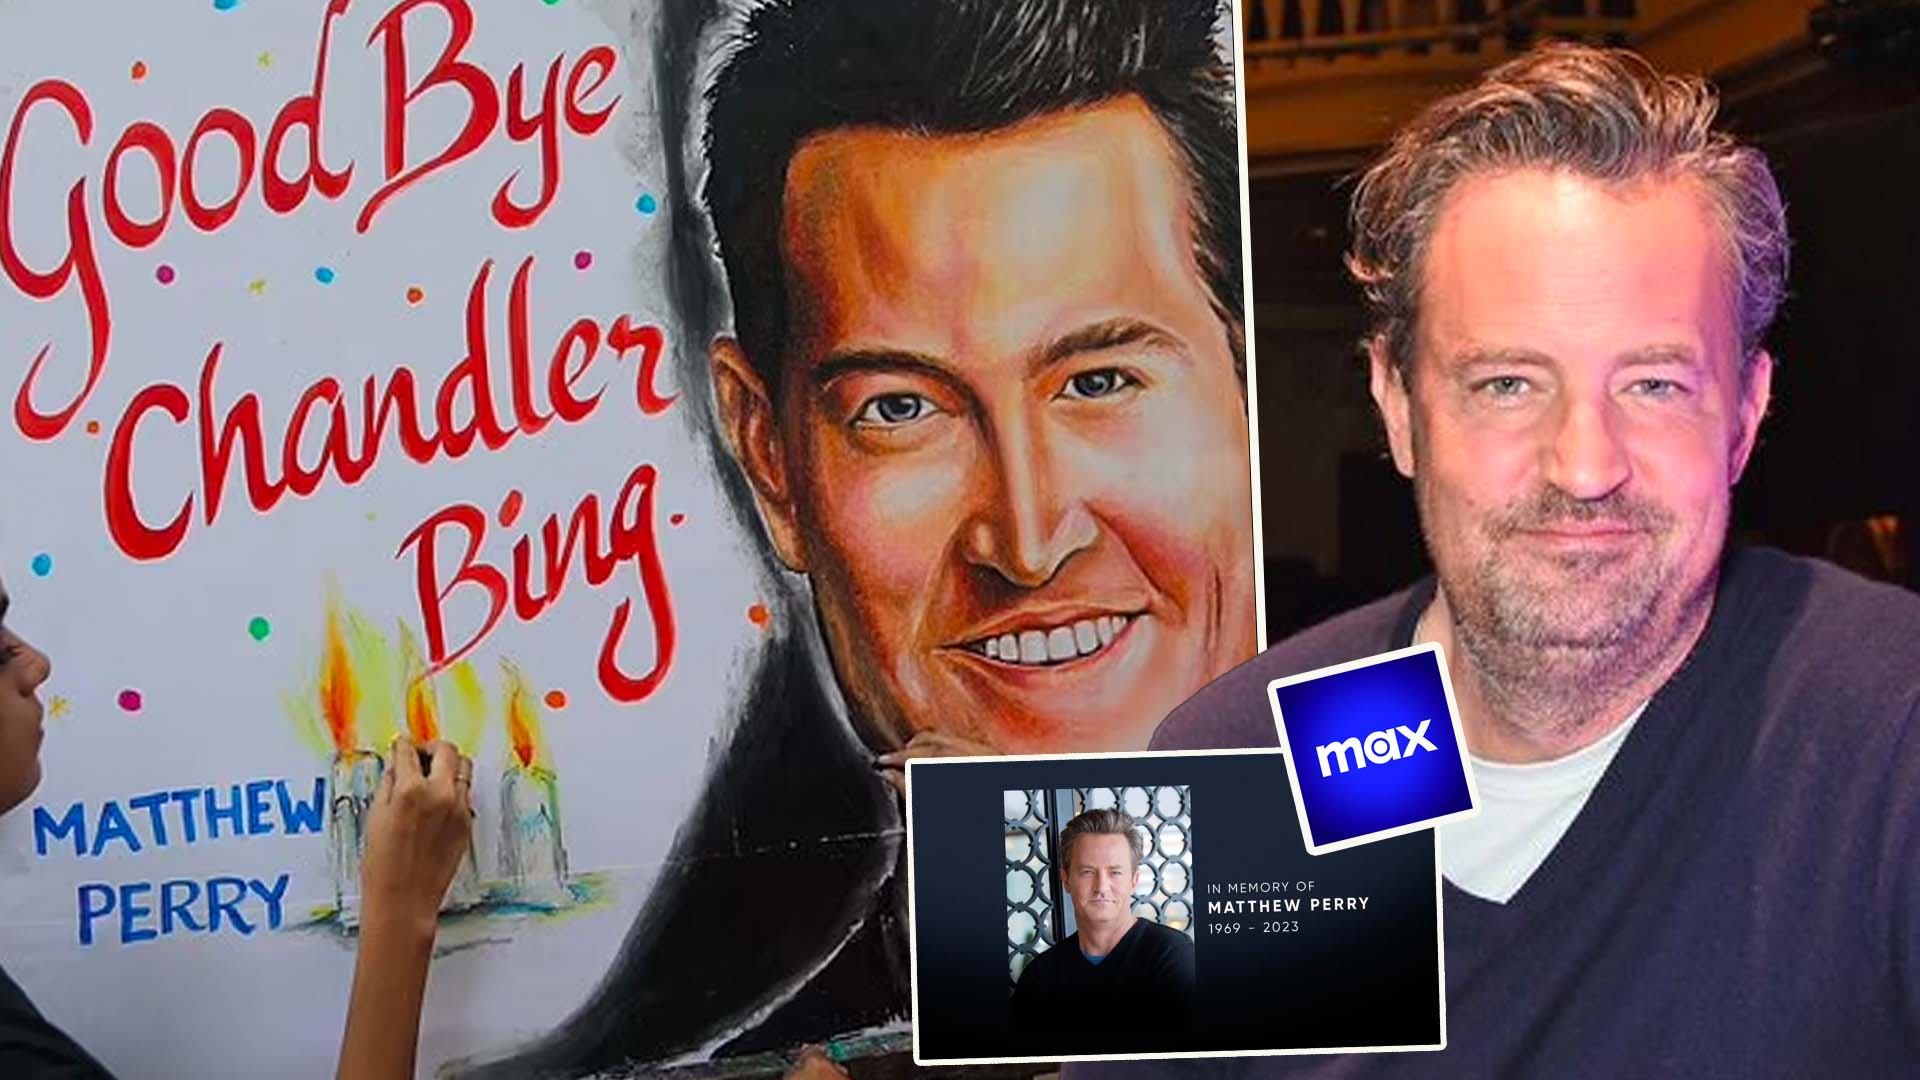 Matthew Perry Fans Pay Tribute at Chandler Bing's Iconic 'Friends' Apartment